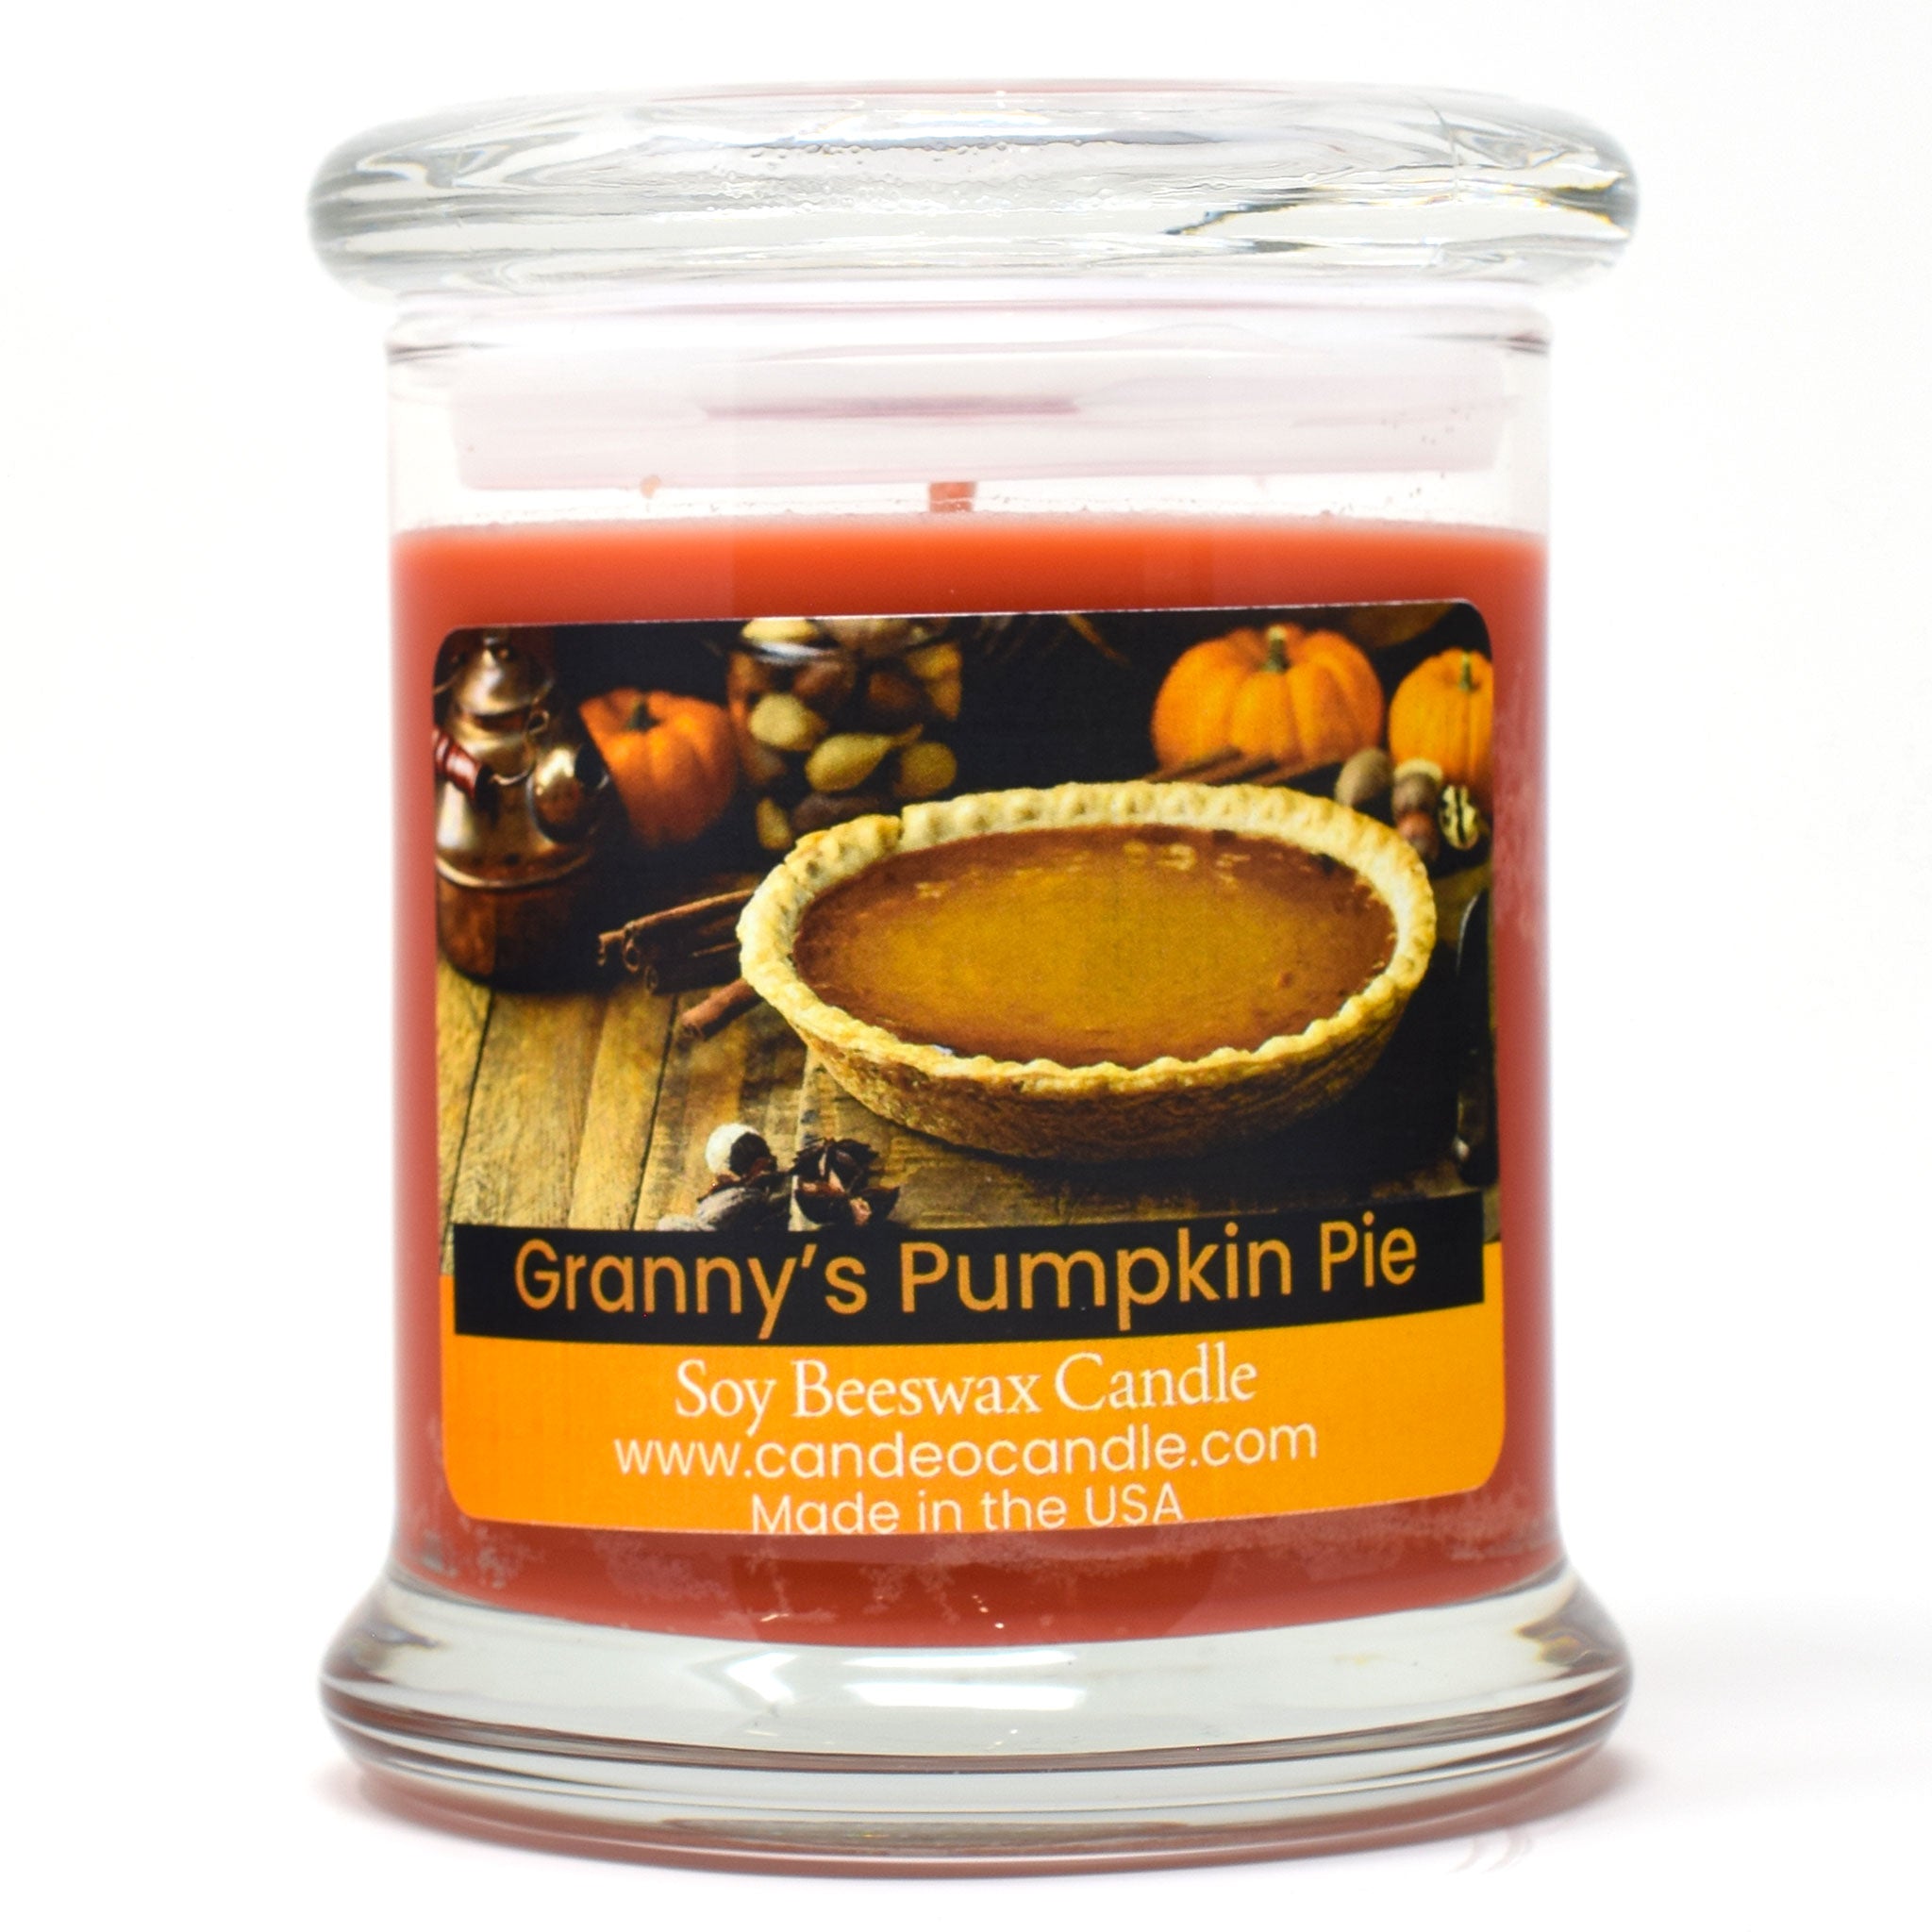 Granny's Pumpkin Pie, 9oz Soy Candle Jar - Candeo Candle